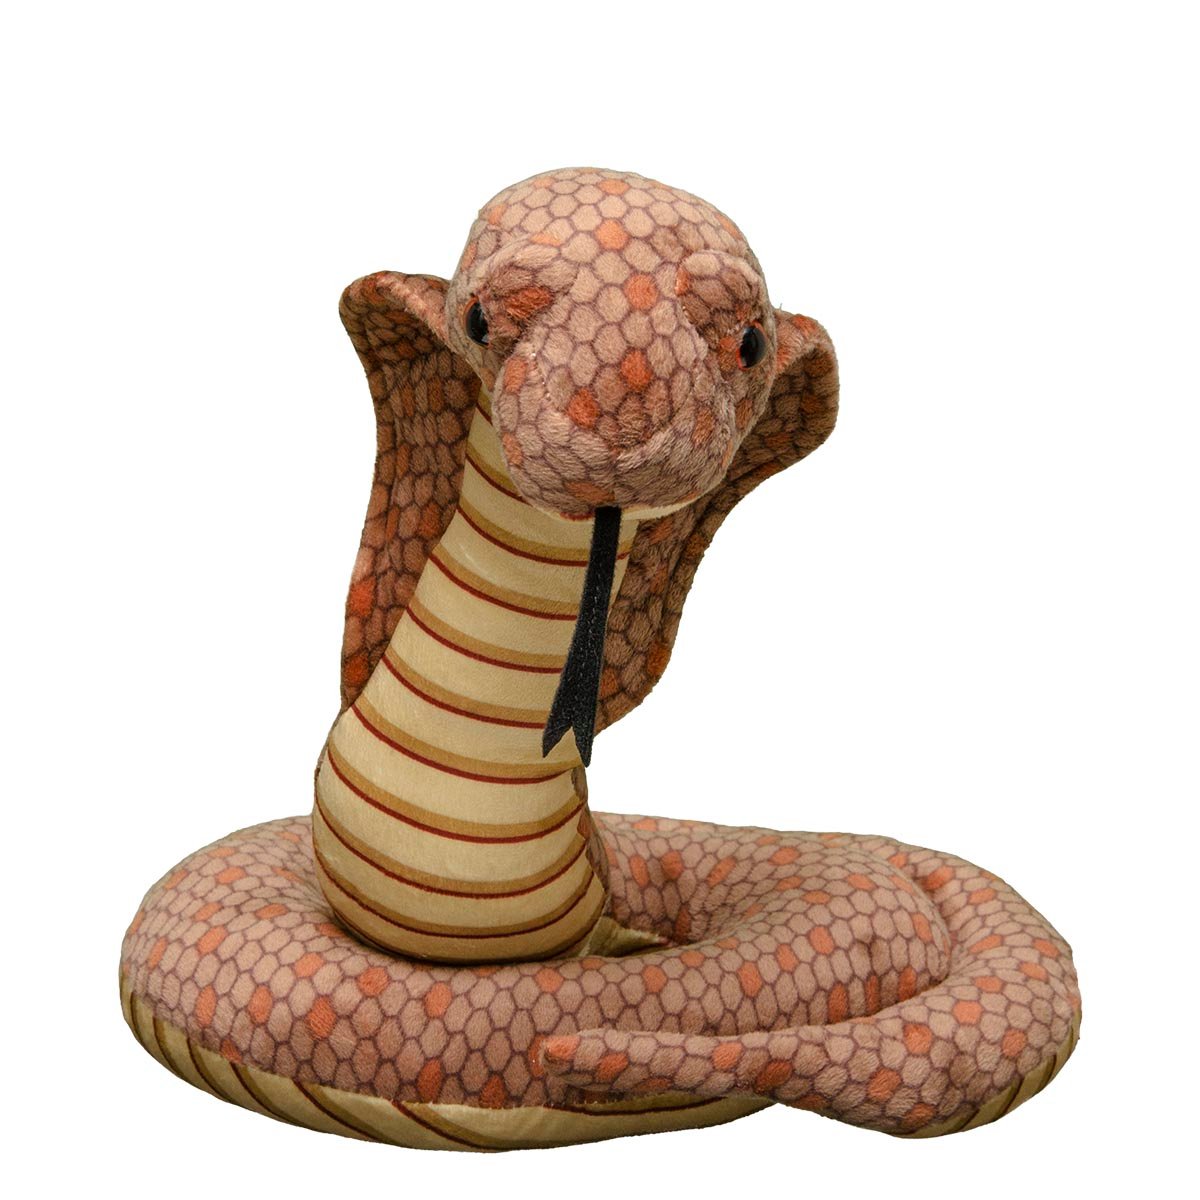 8 Intriguing King Cobra Facts